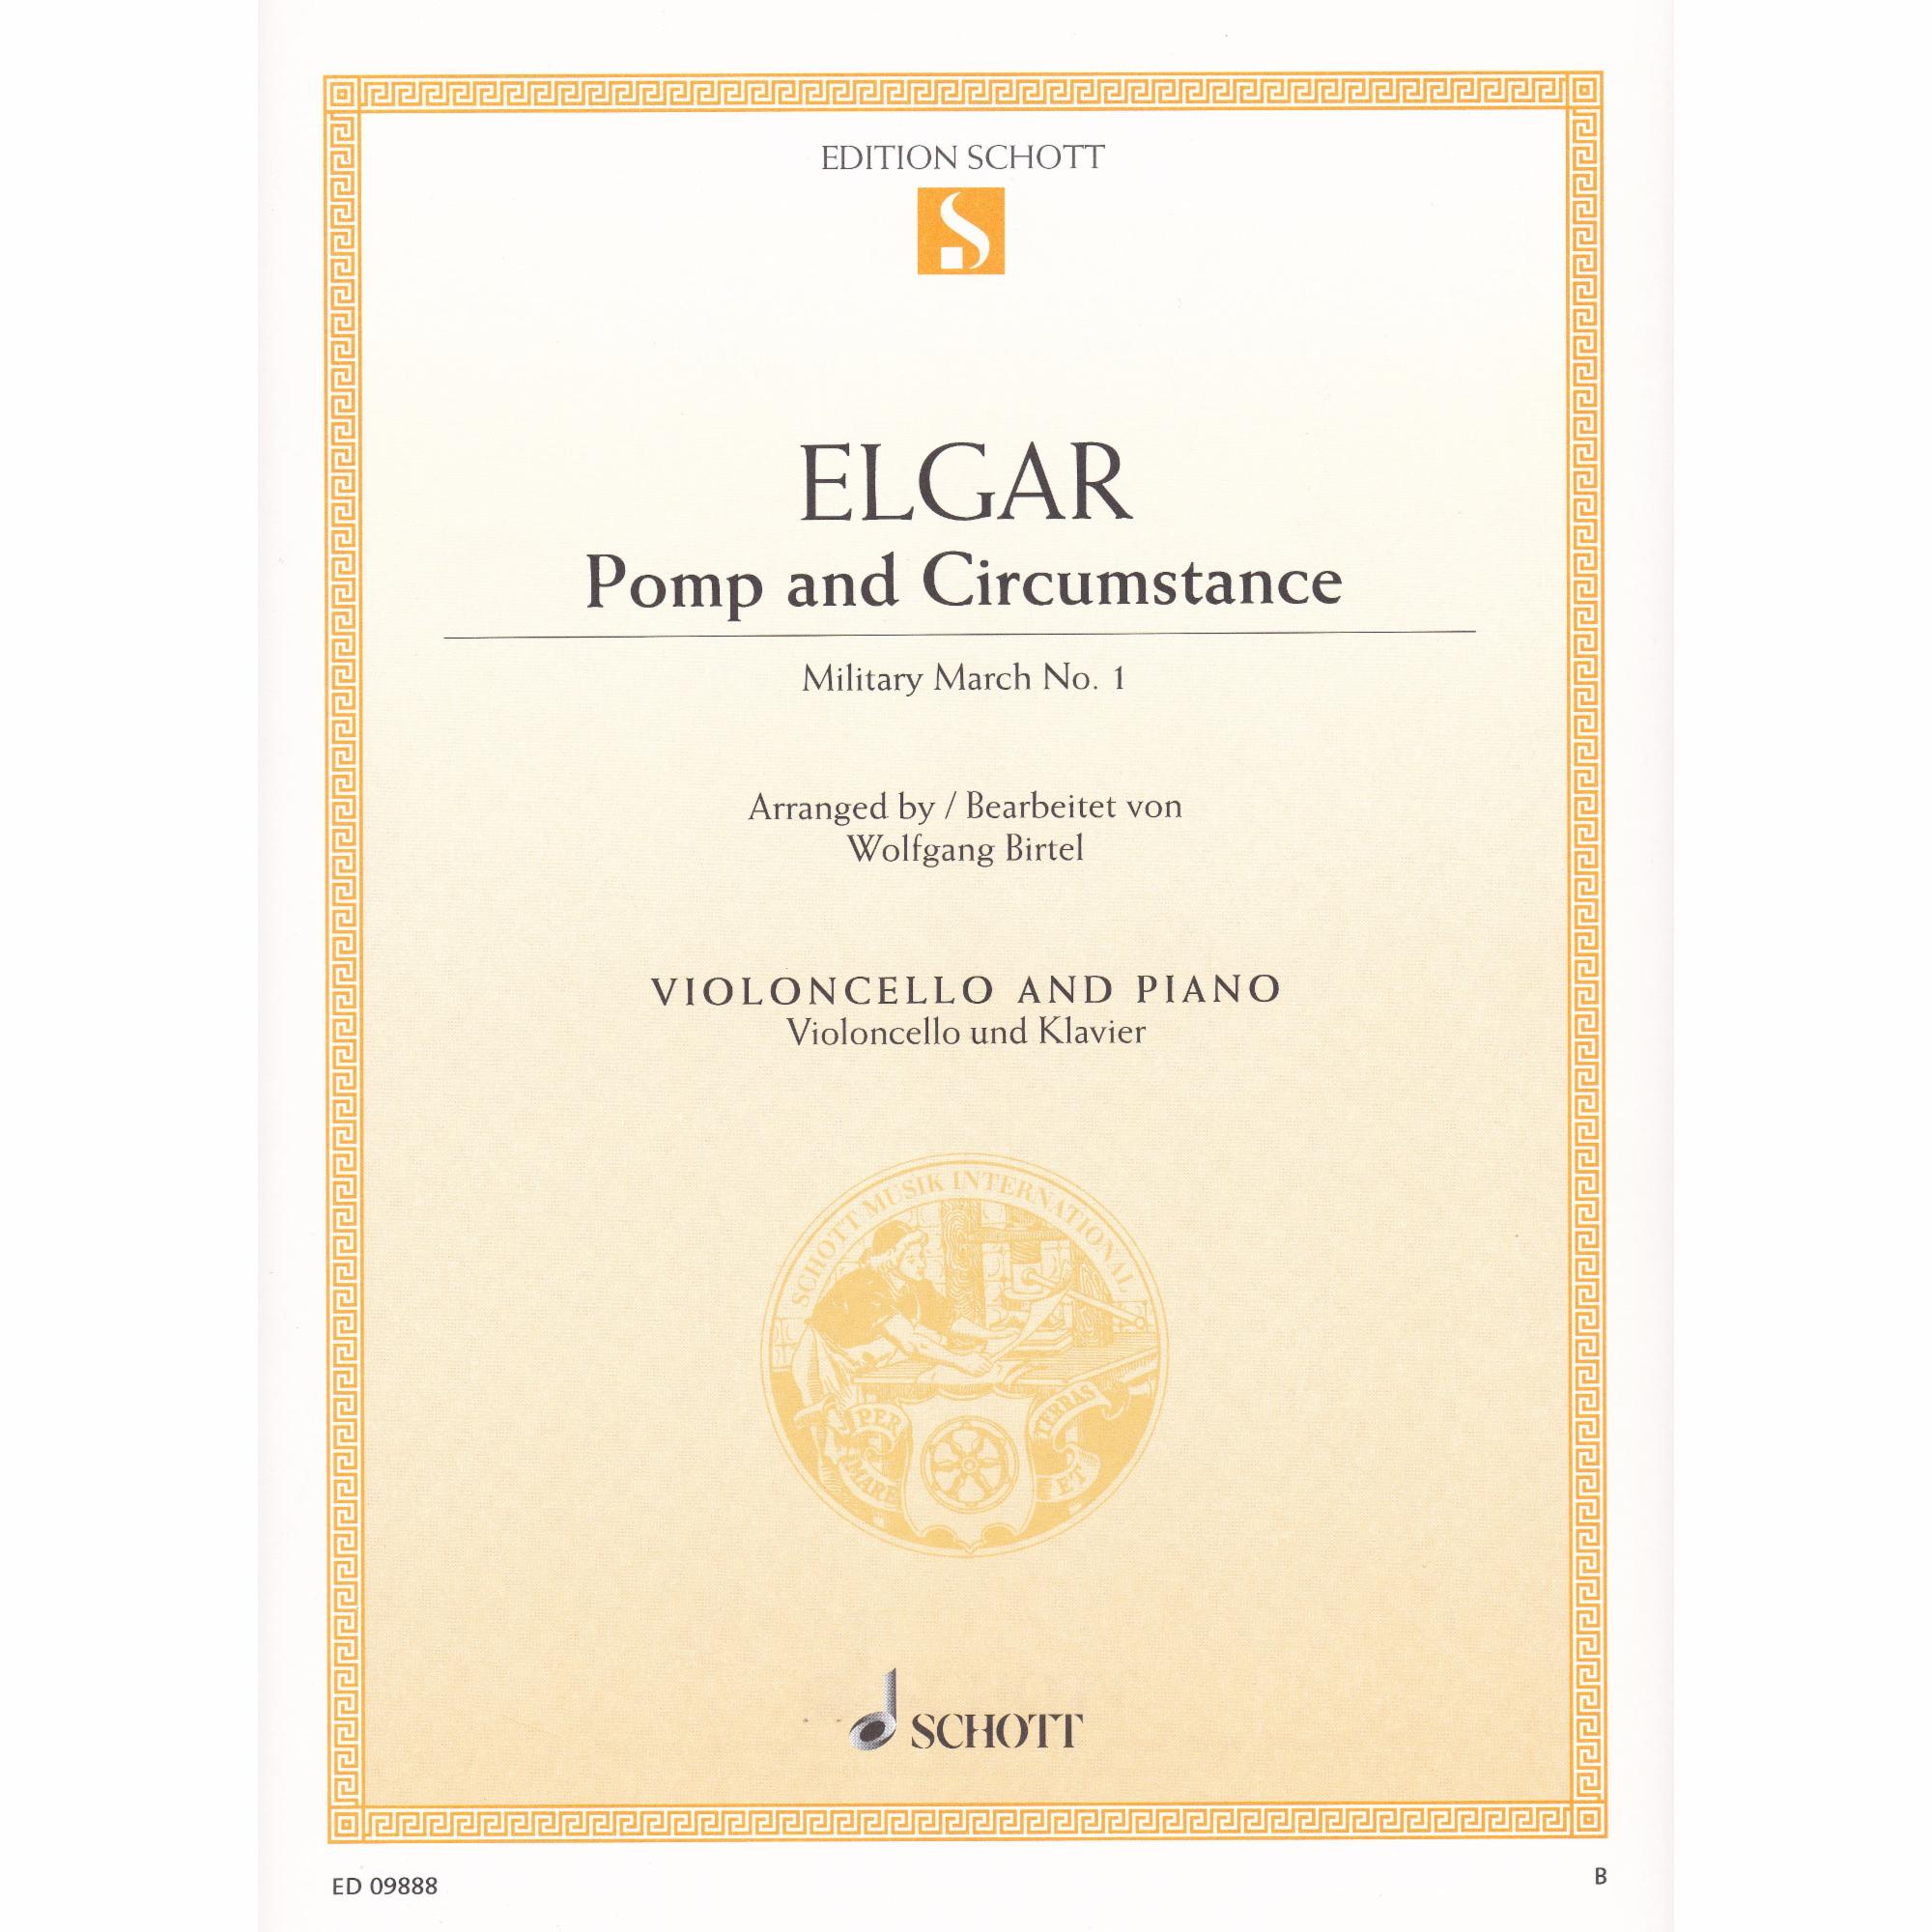 Pomp and Circumstance for Cello and Piano, Op. 39, No. 1